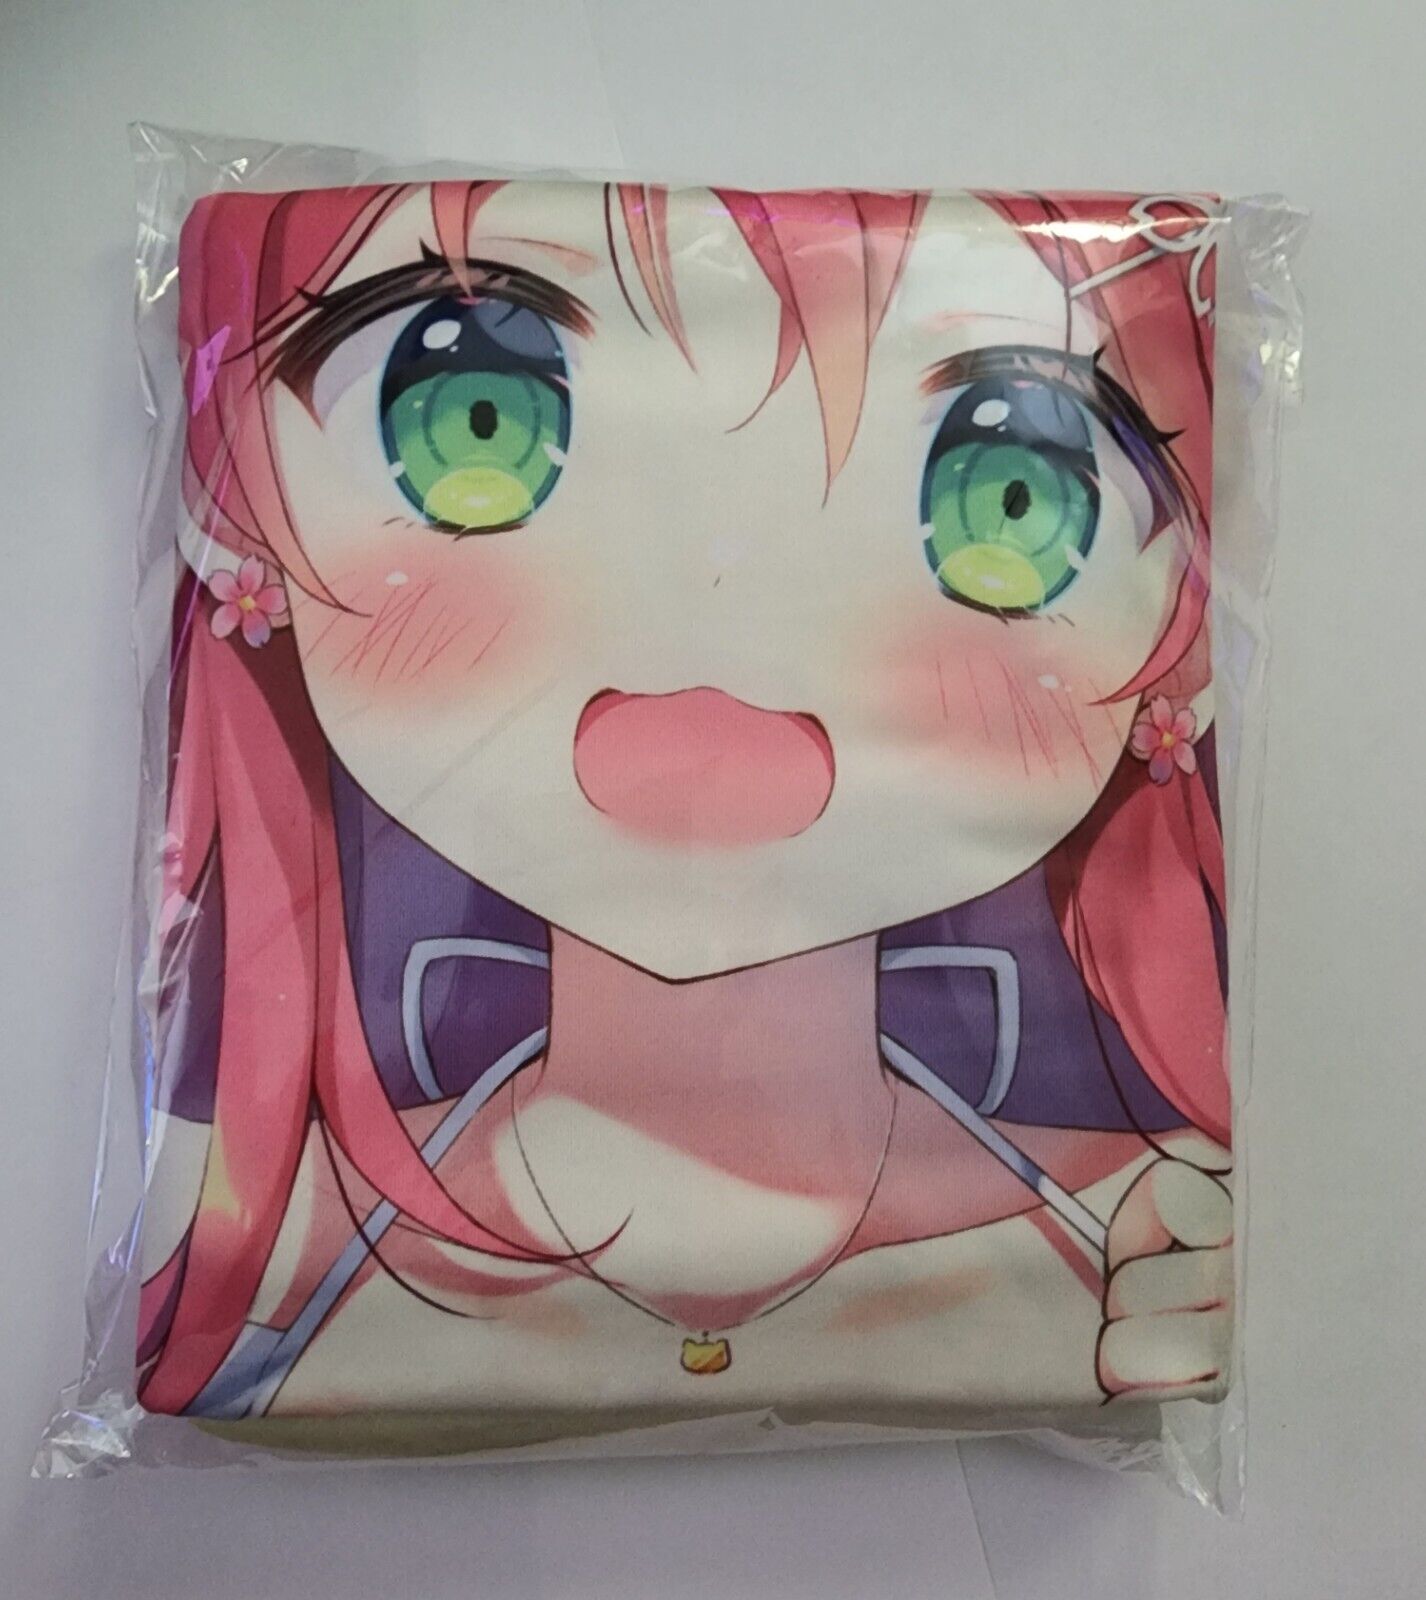 Official Hololive Sakura Miko 3rd Anniversary Pillow Cover - Brand New, Unopened